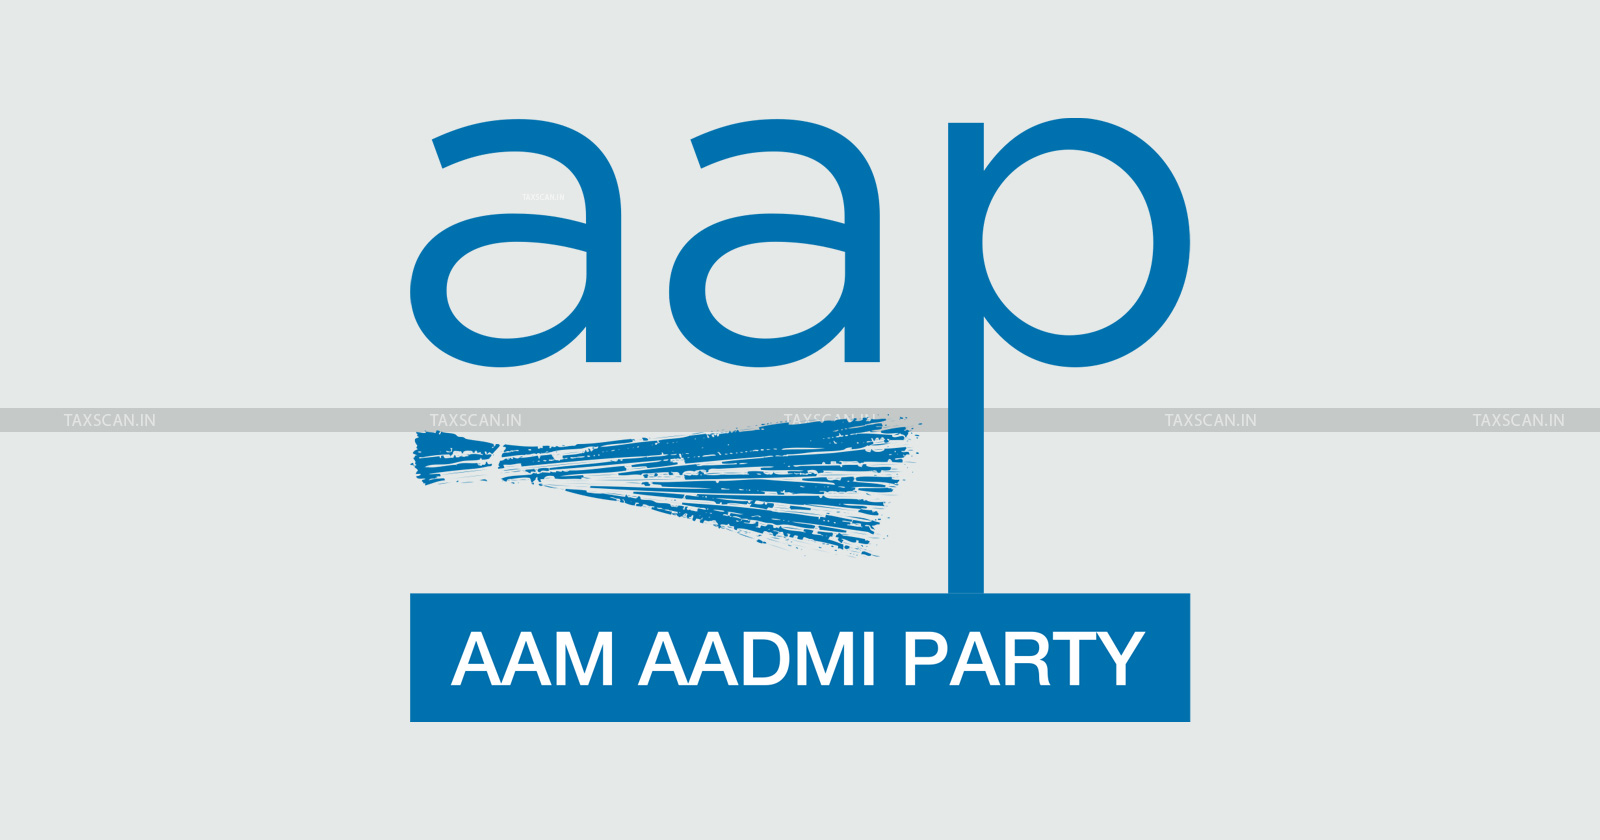 Supreme Court - Aam Aadmi Party - Aam Aadmi Party NFAC Case - Aam Aadmi Party legal battle - NFAC controversy - TAXSCAN